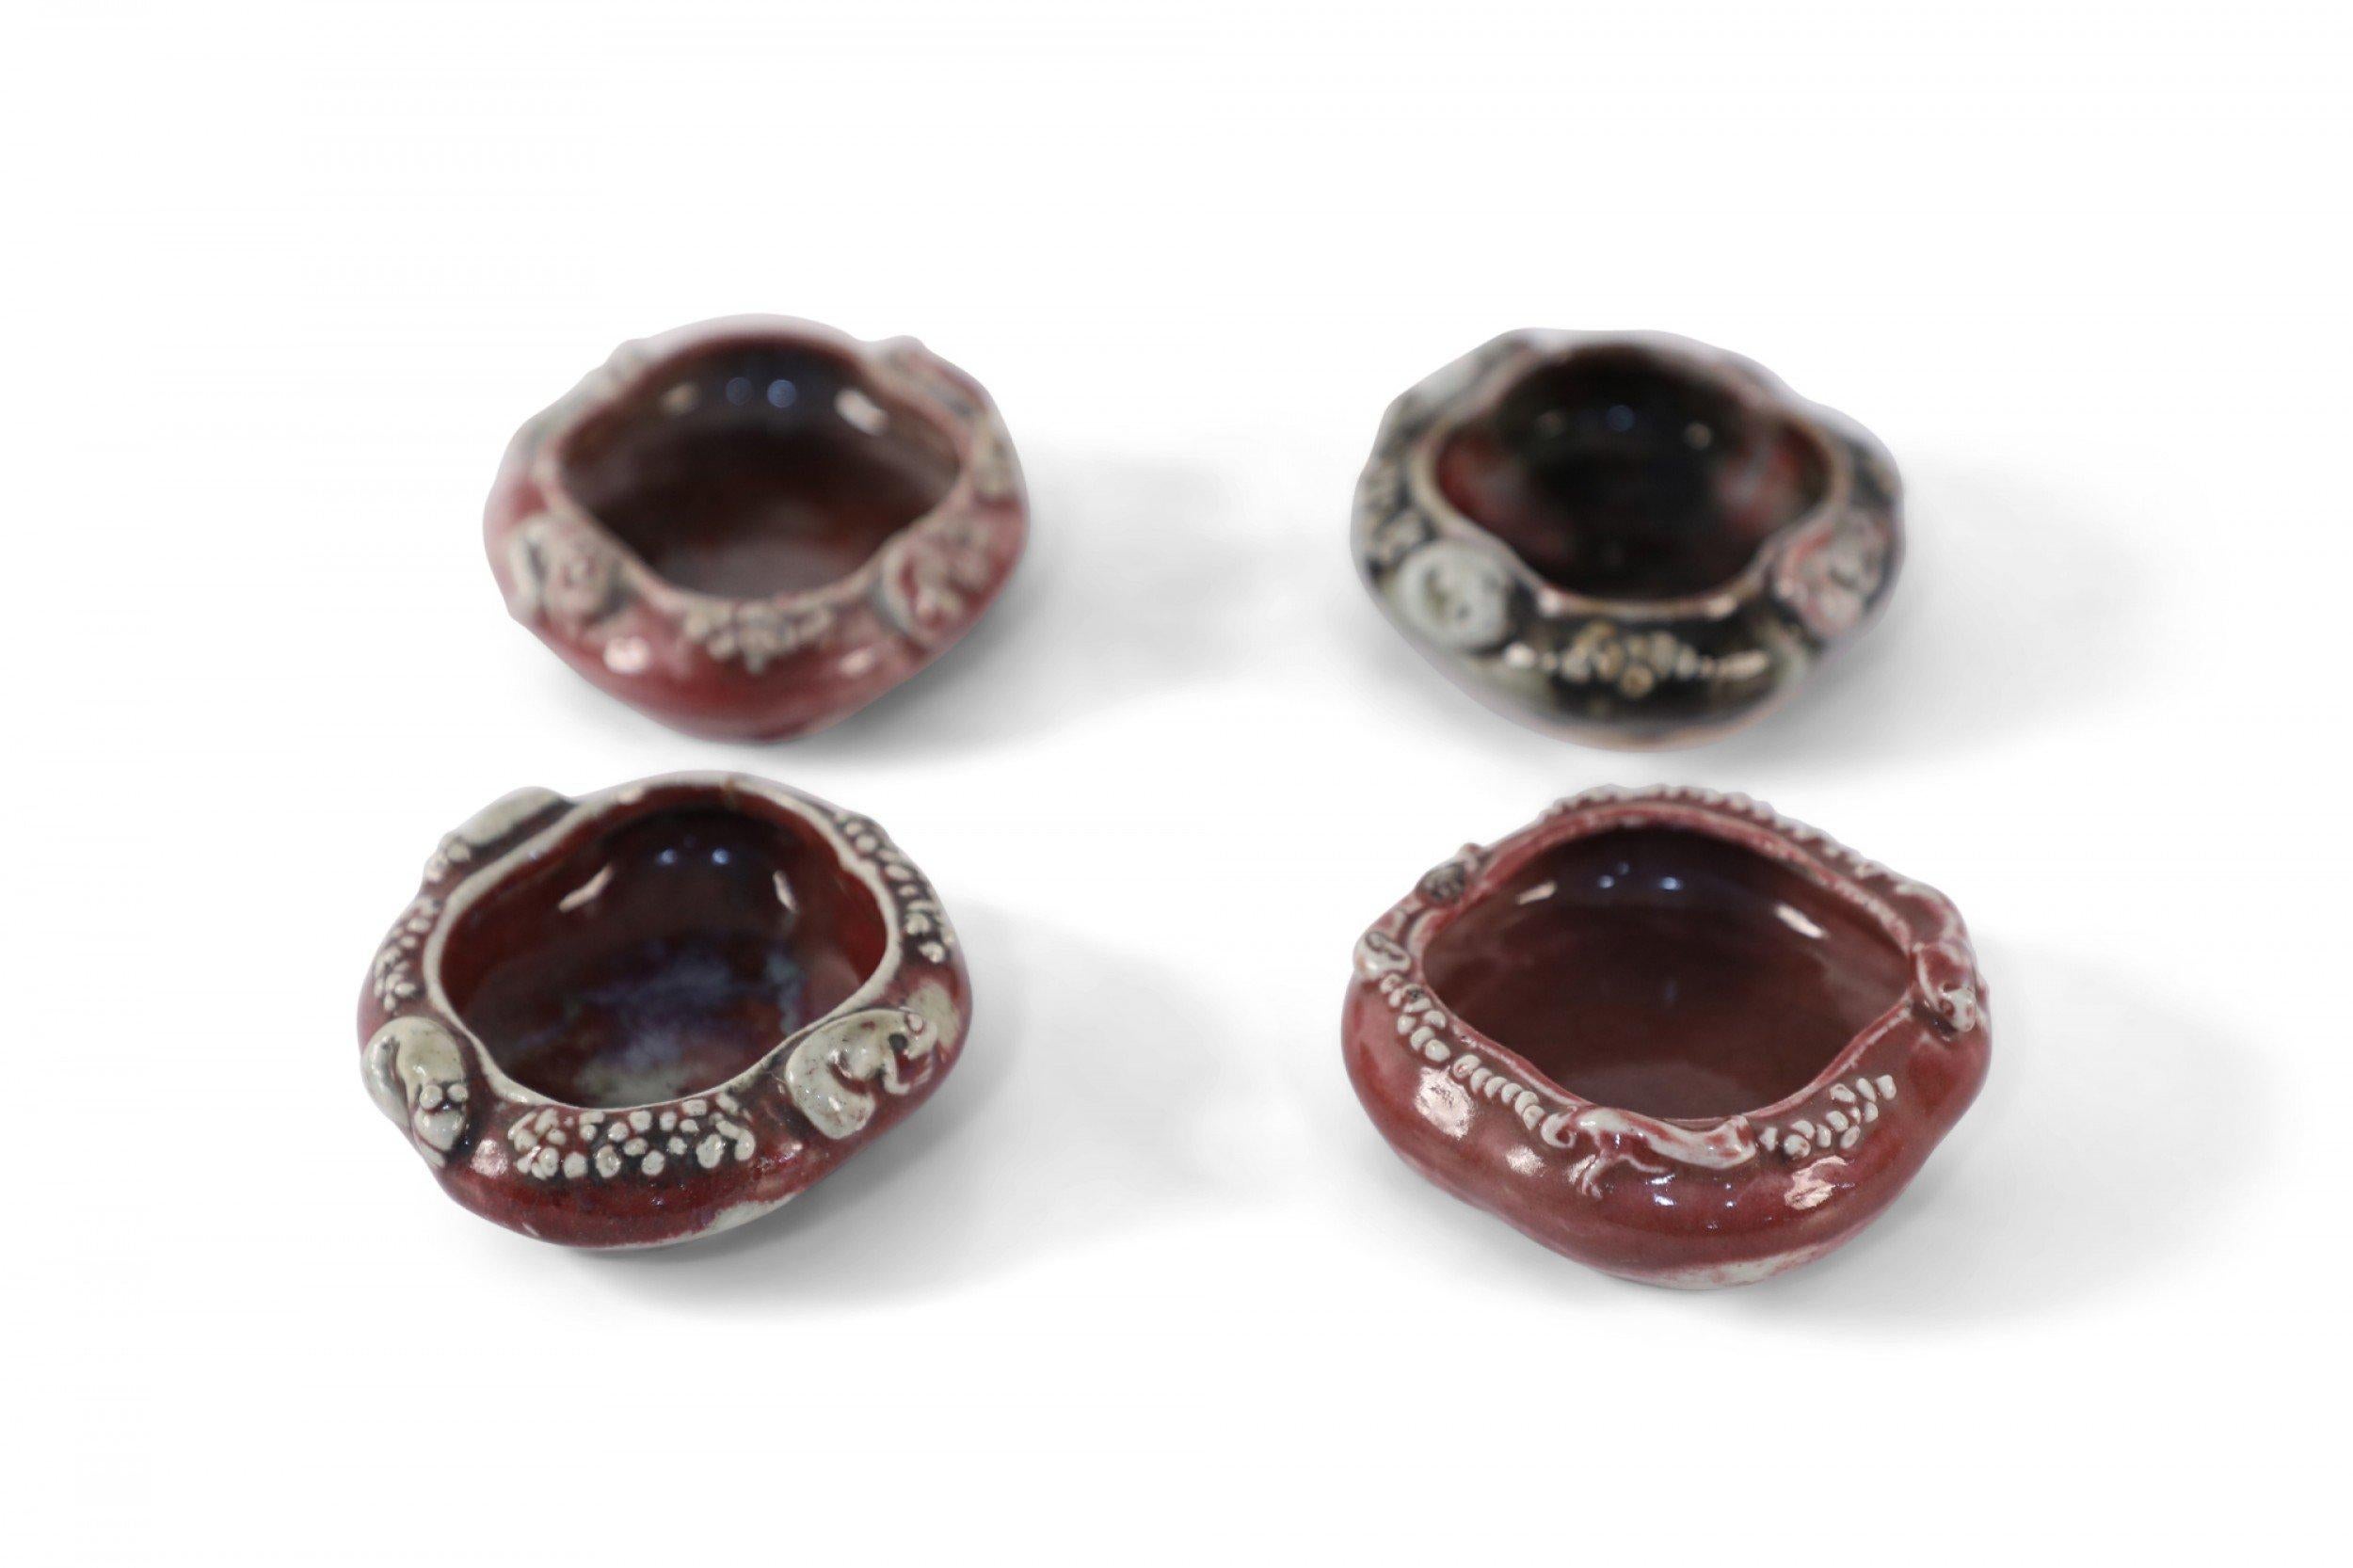 Set of 4 Chinese red glazed porcelain catchalls with organic forms decorated in raised depictions of frogs around the exteriors (priced as set).
     